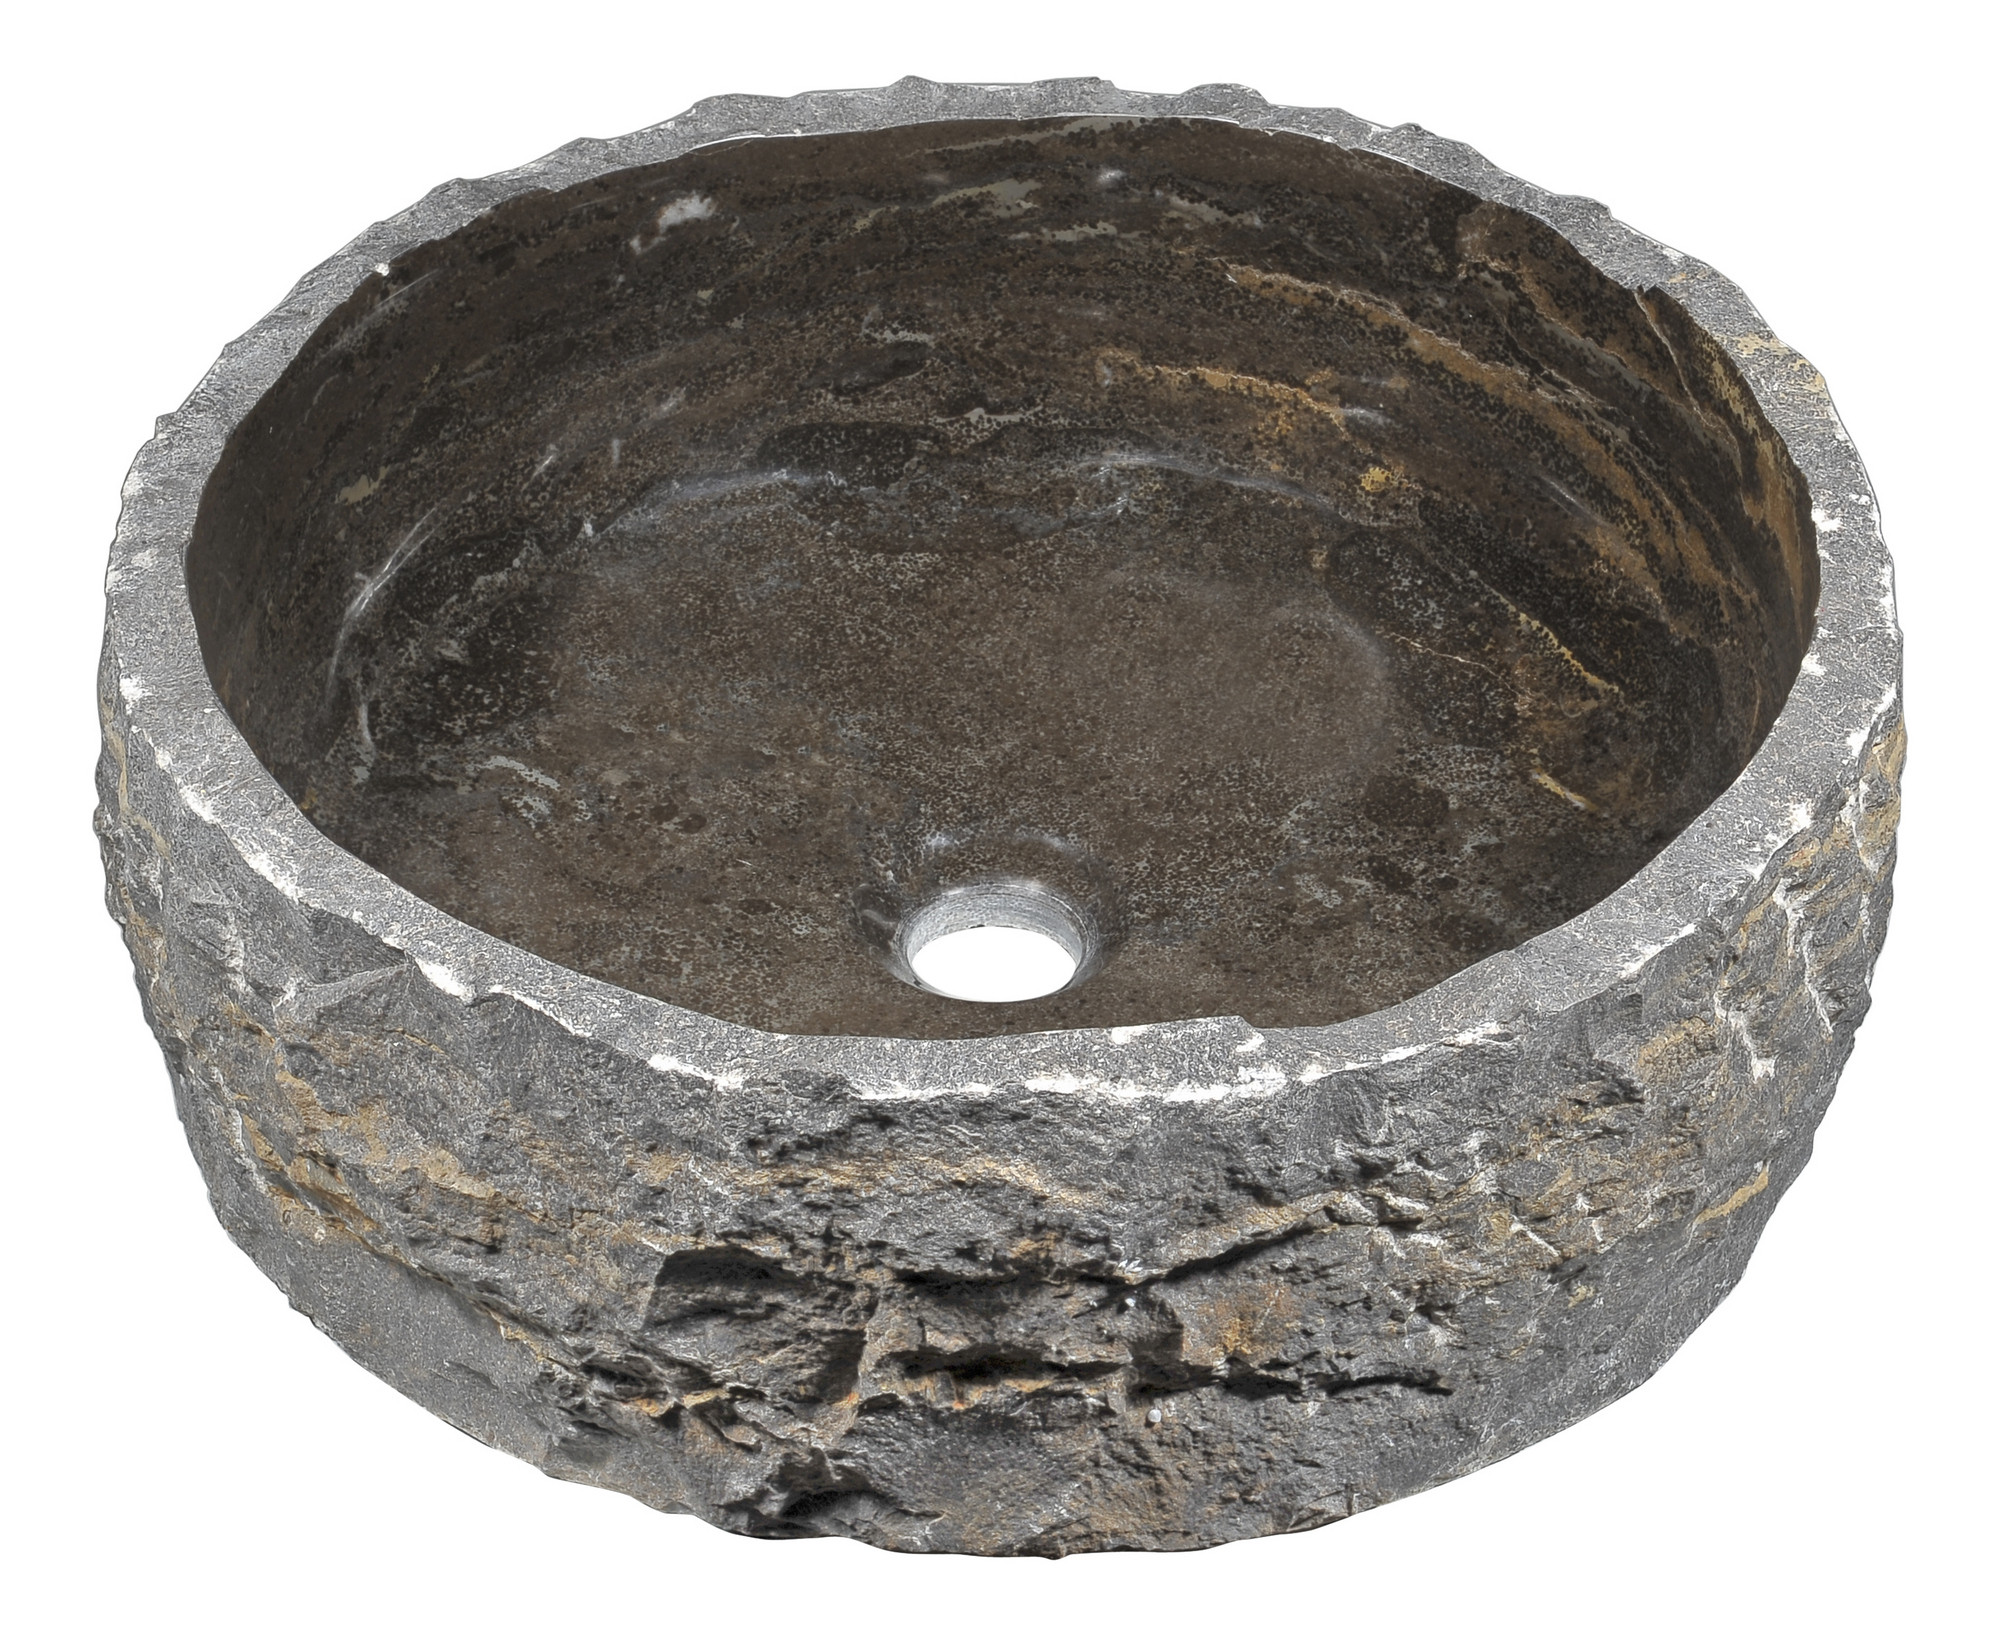 ANZZI LS-AZ152 Umbral Crown Natural Stone Vessel Sink In Blue Stone